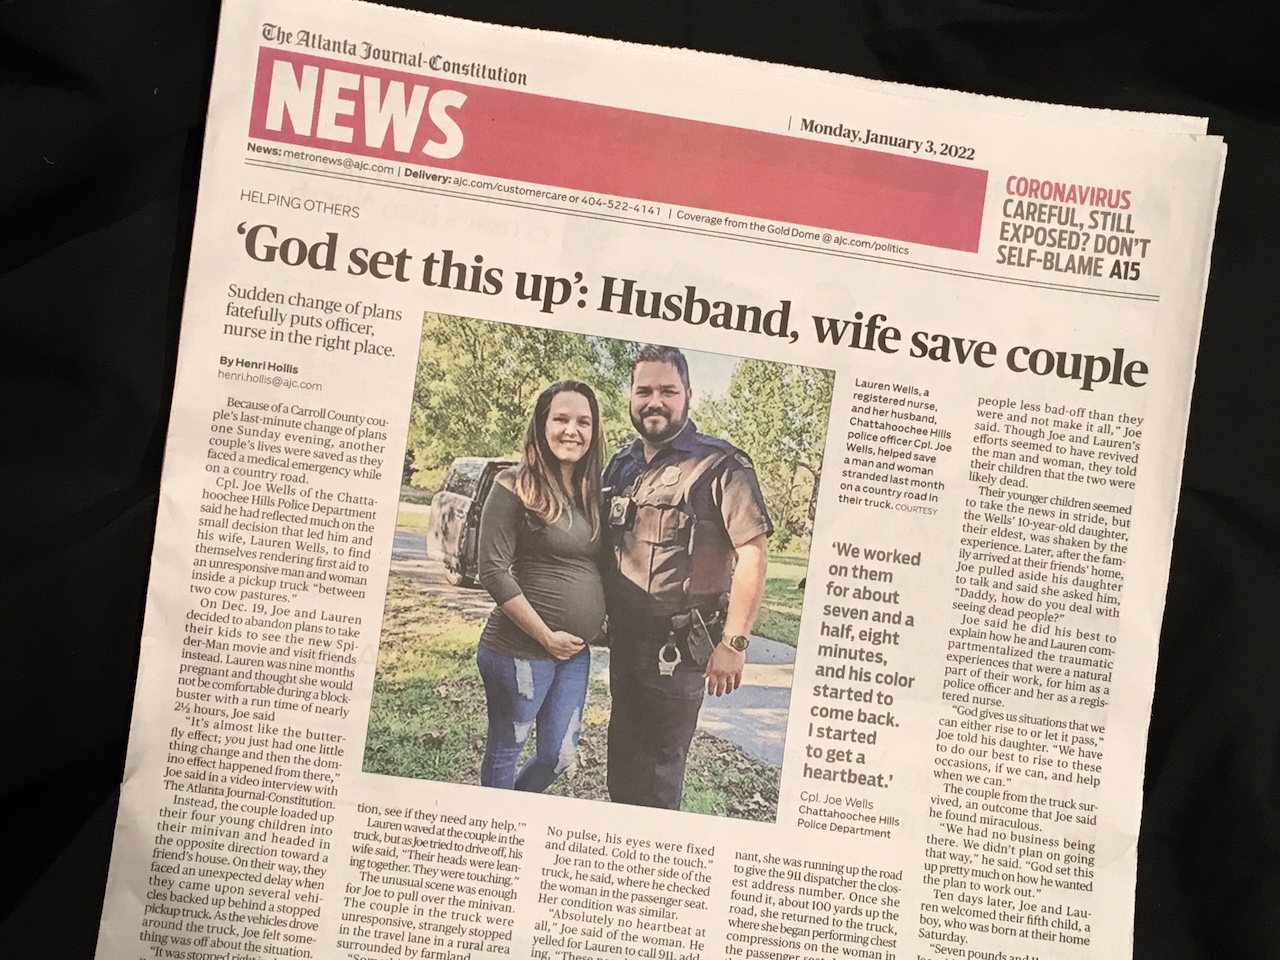 Newspaper (AJC) clipping about couple who save 2 lives